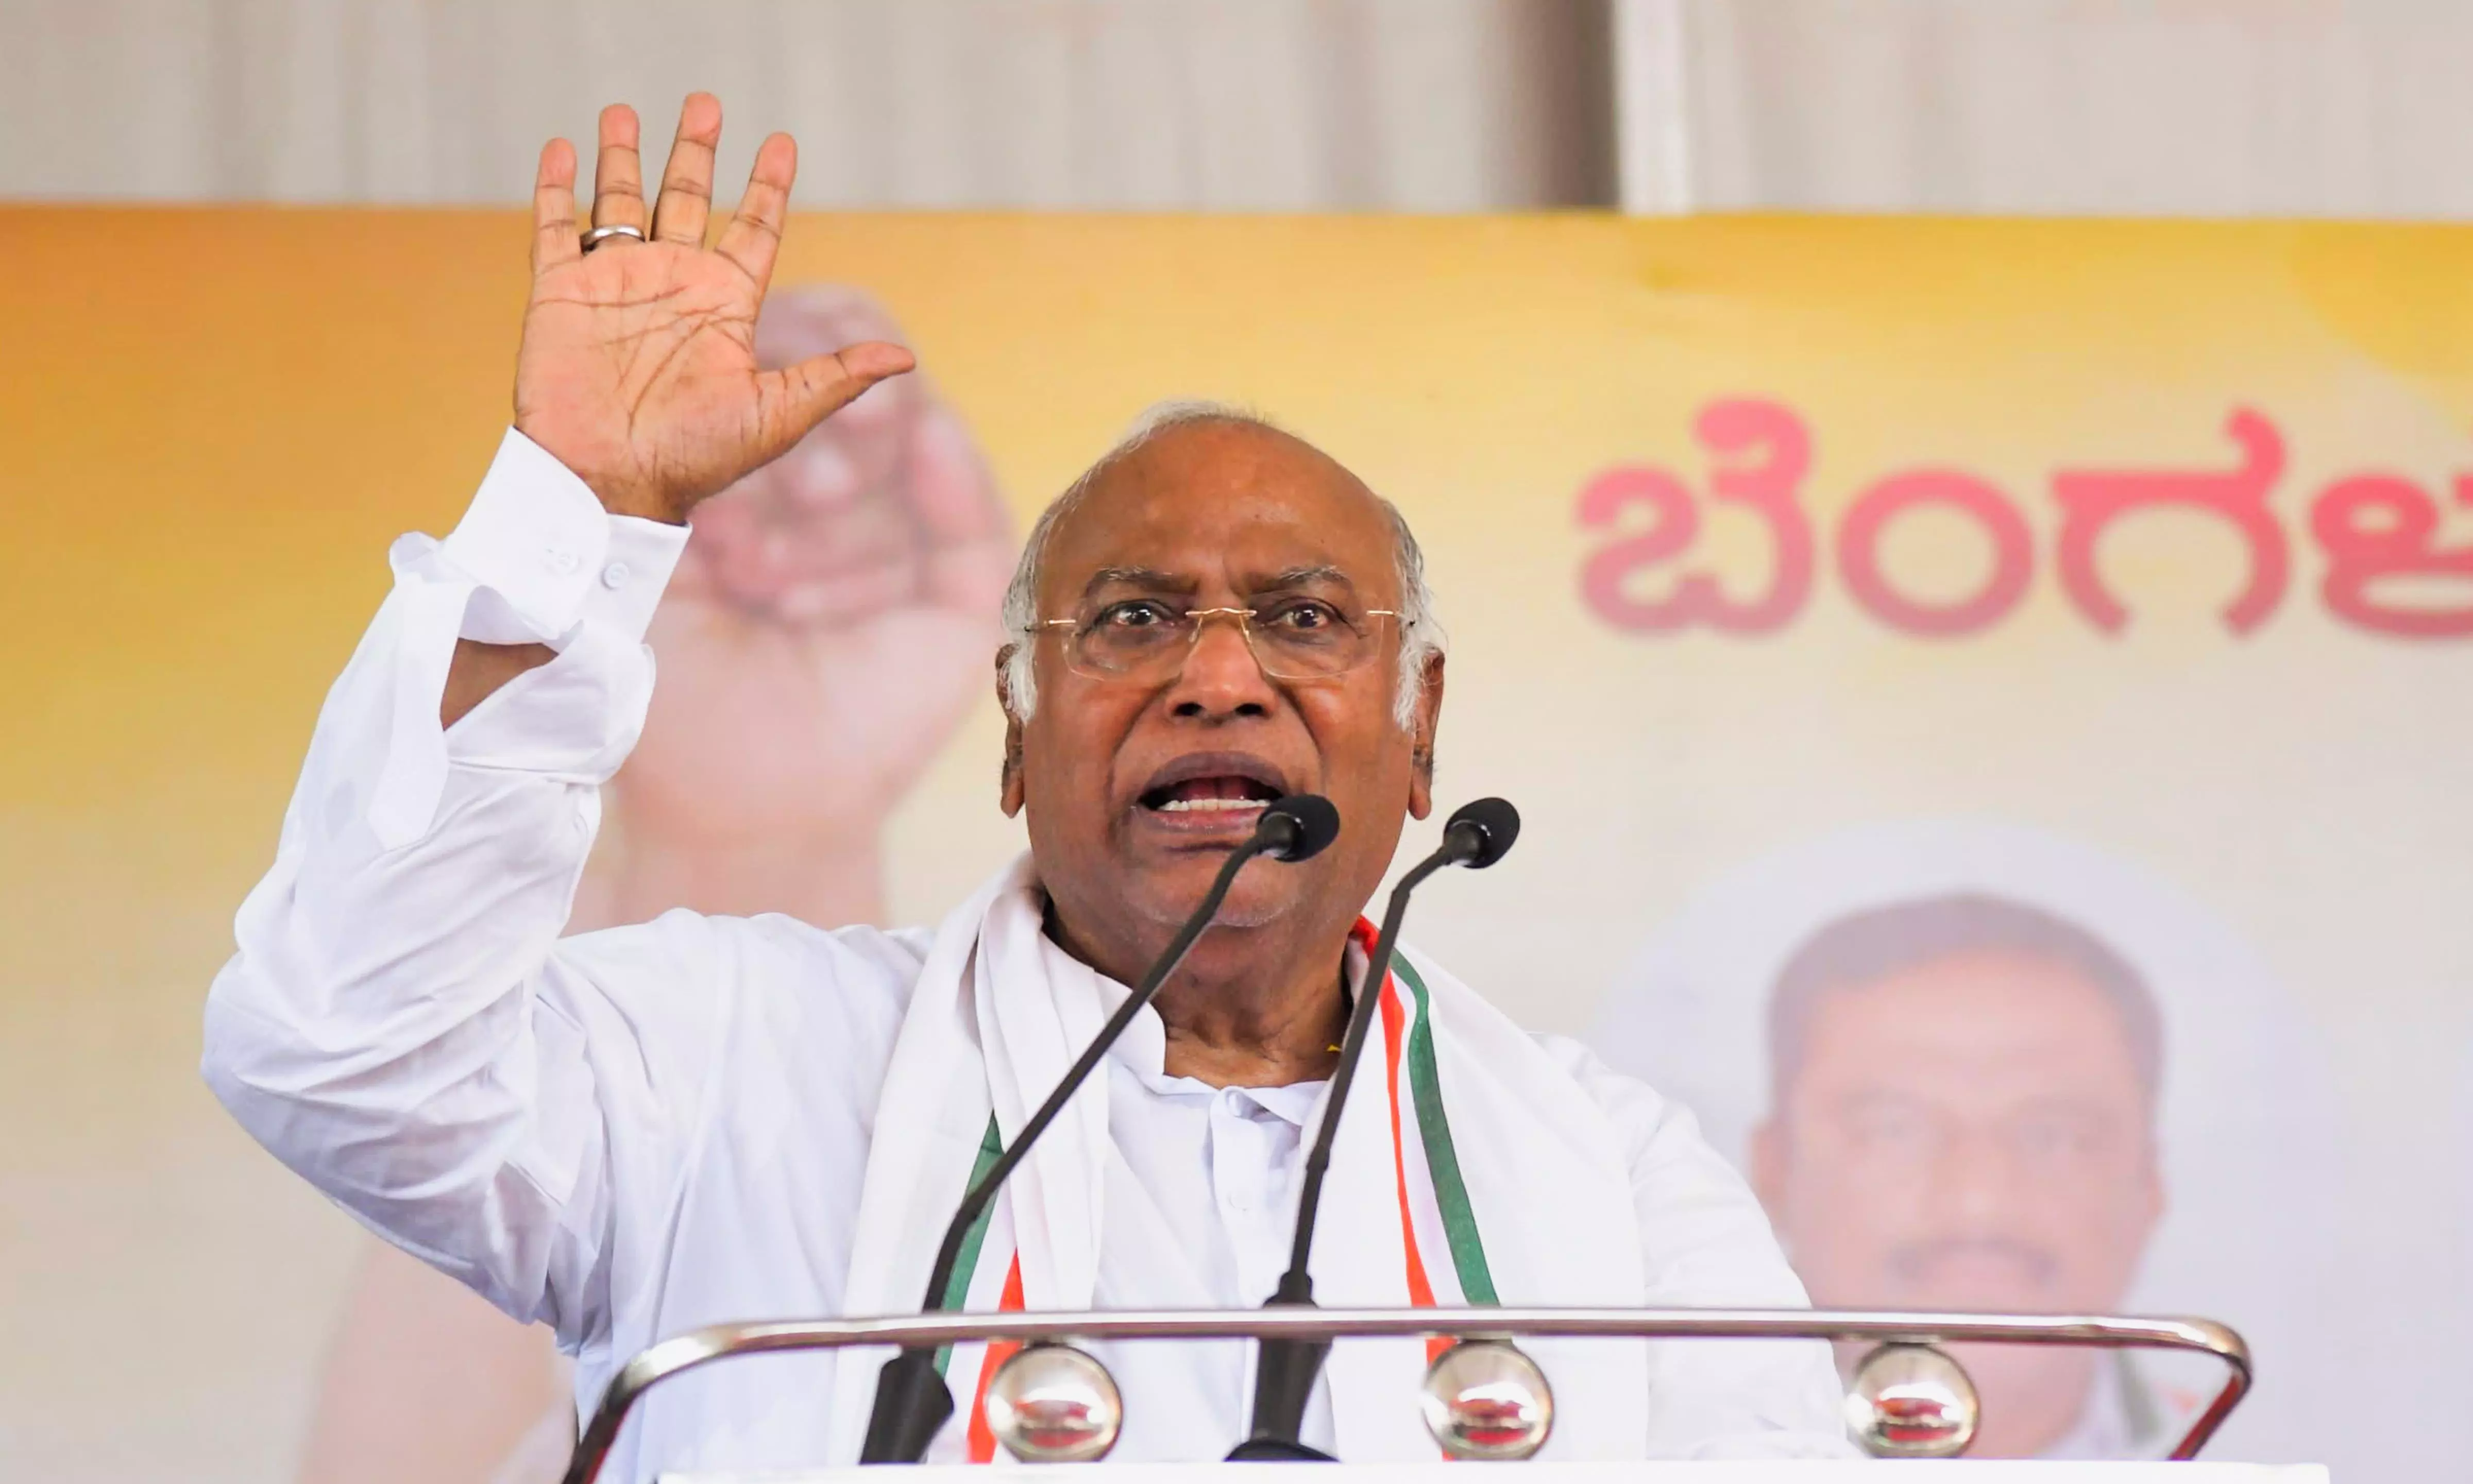 At least come for my funeral..., Kharge makes emotional pitch at rally on home turf